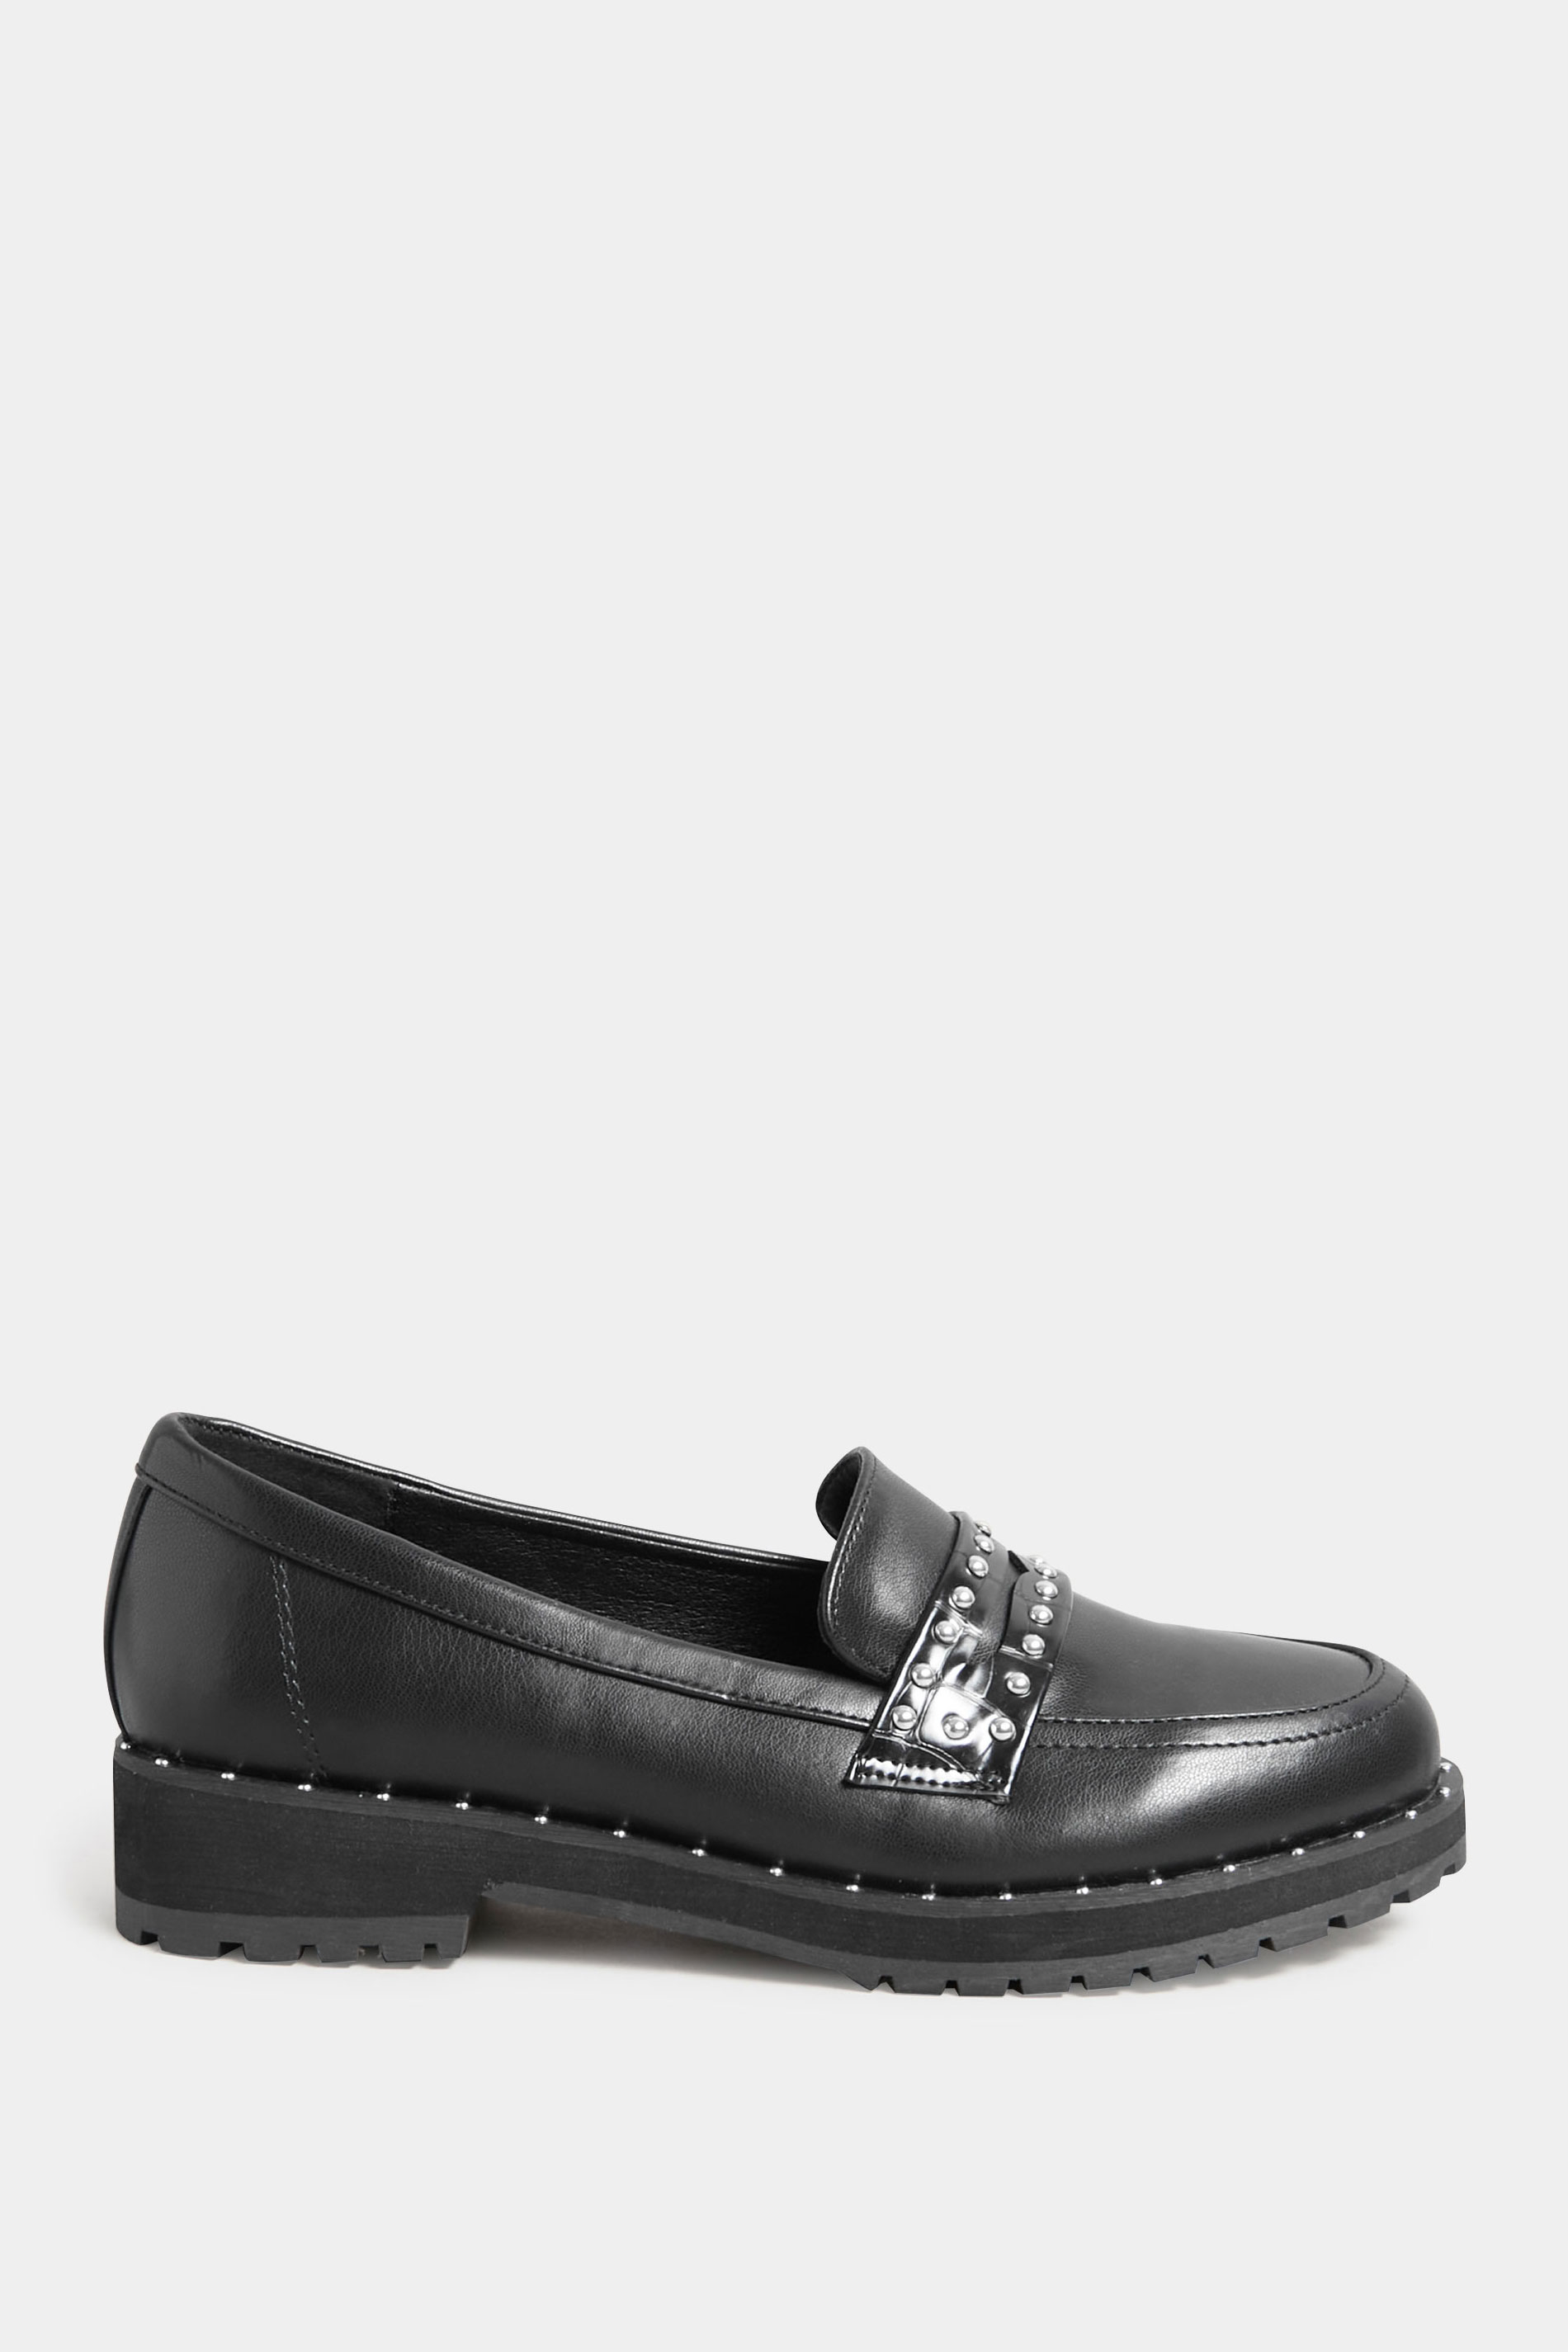 LTS Black Stud Loafers In Standard Fit | Long Tall Sally 3